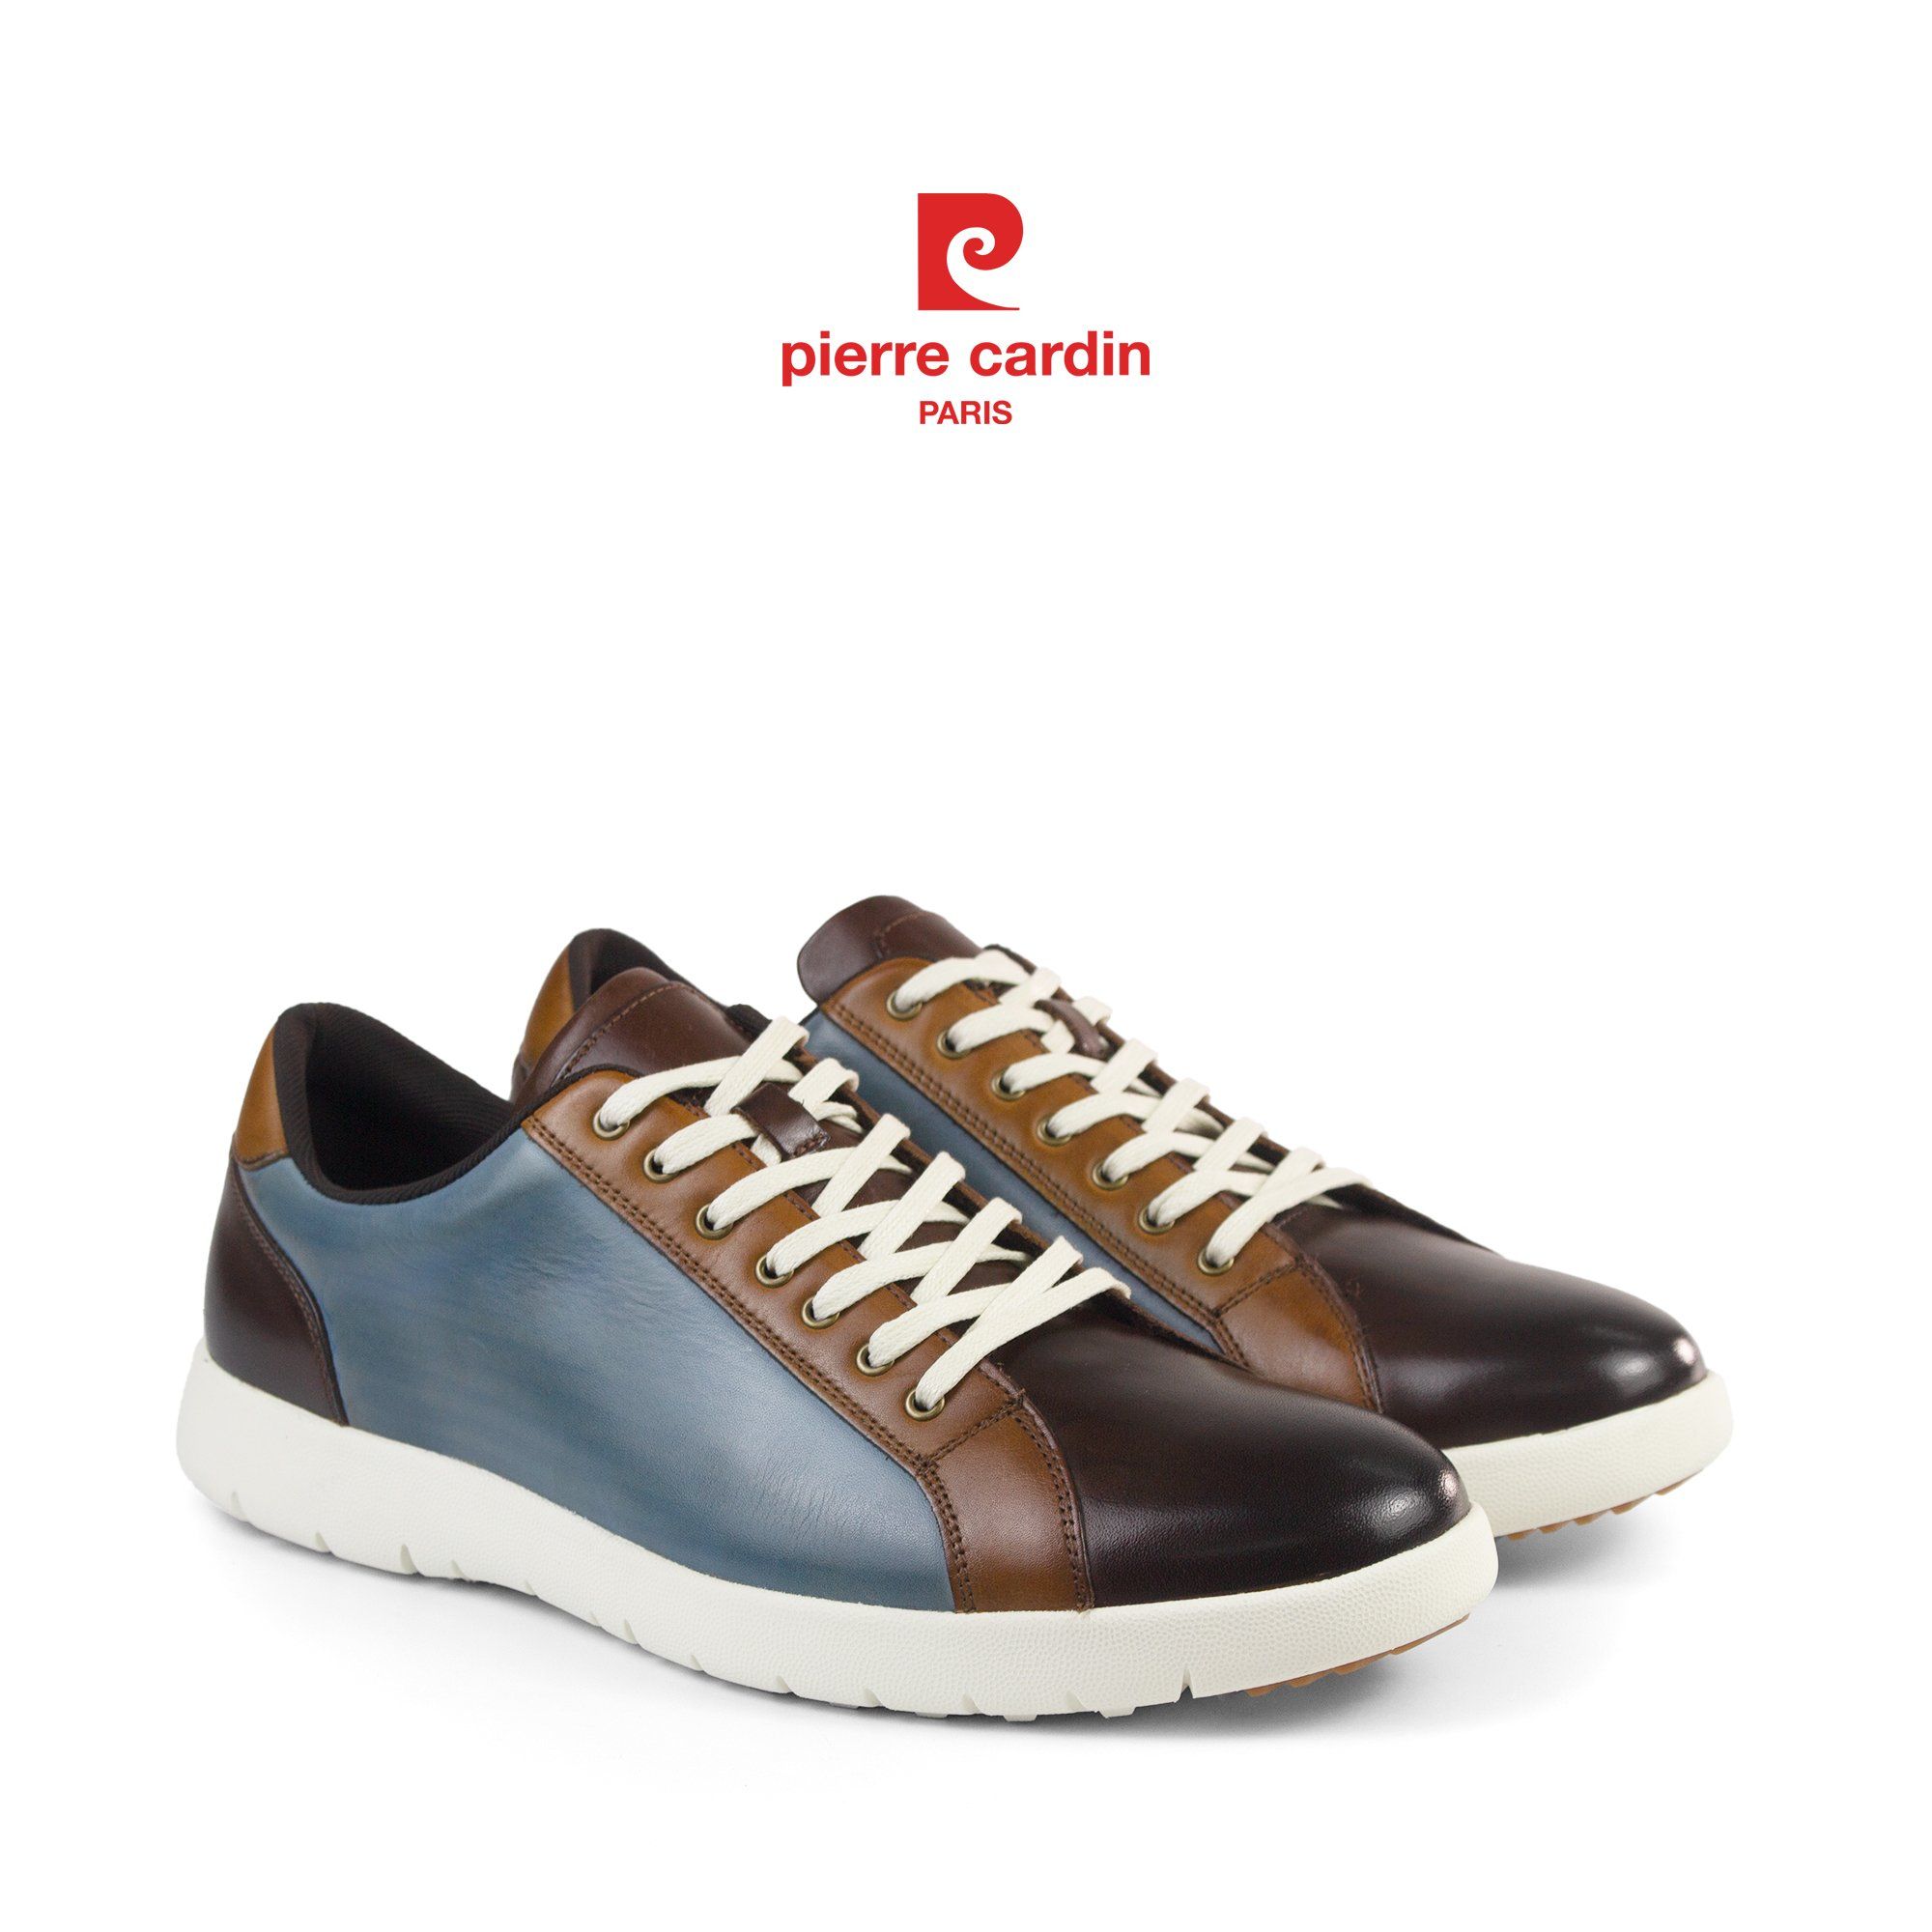 Giày Thể Thao Pierre Cardin #790